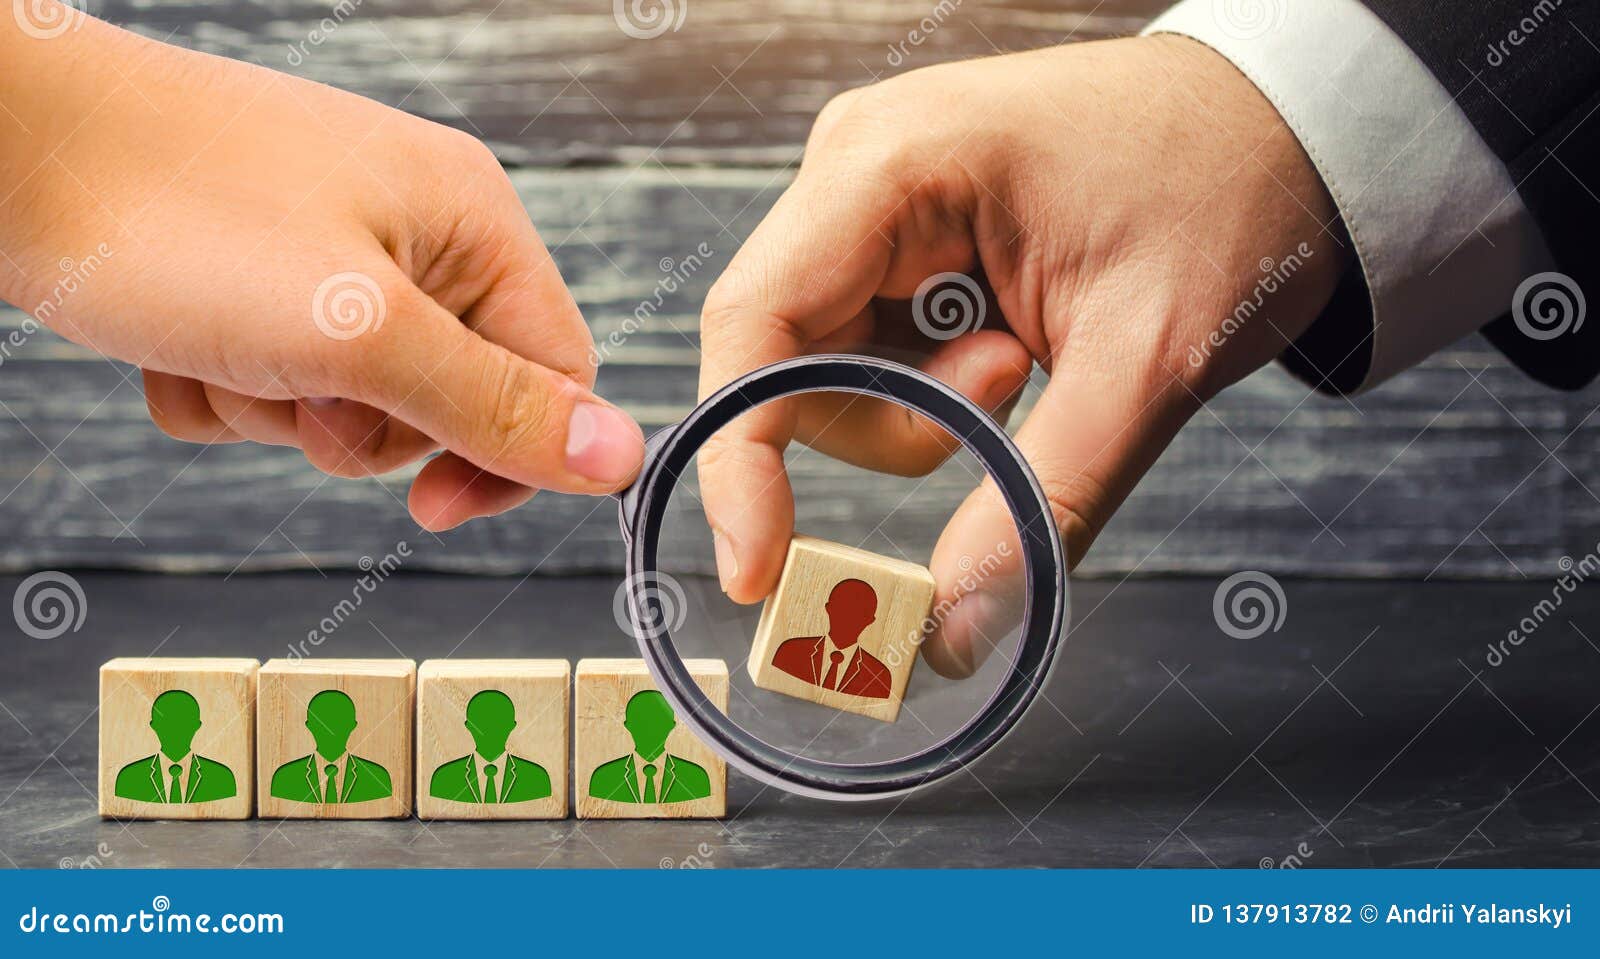 the businessman removes / dismisses the employee from the team. management within the team. wooden blocks with a picture of